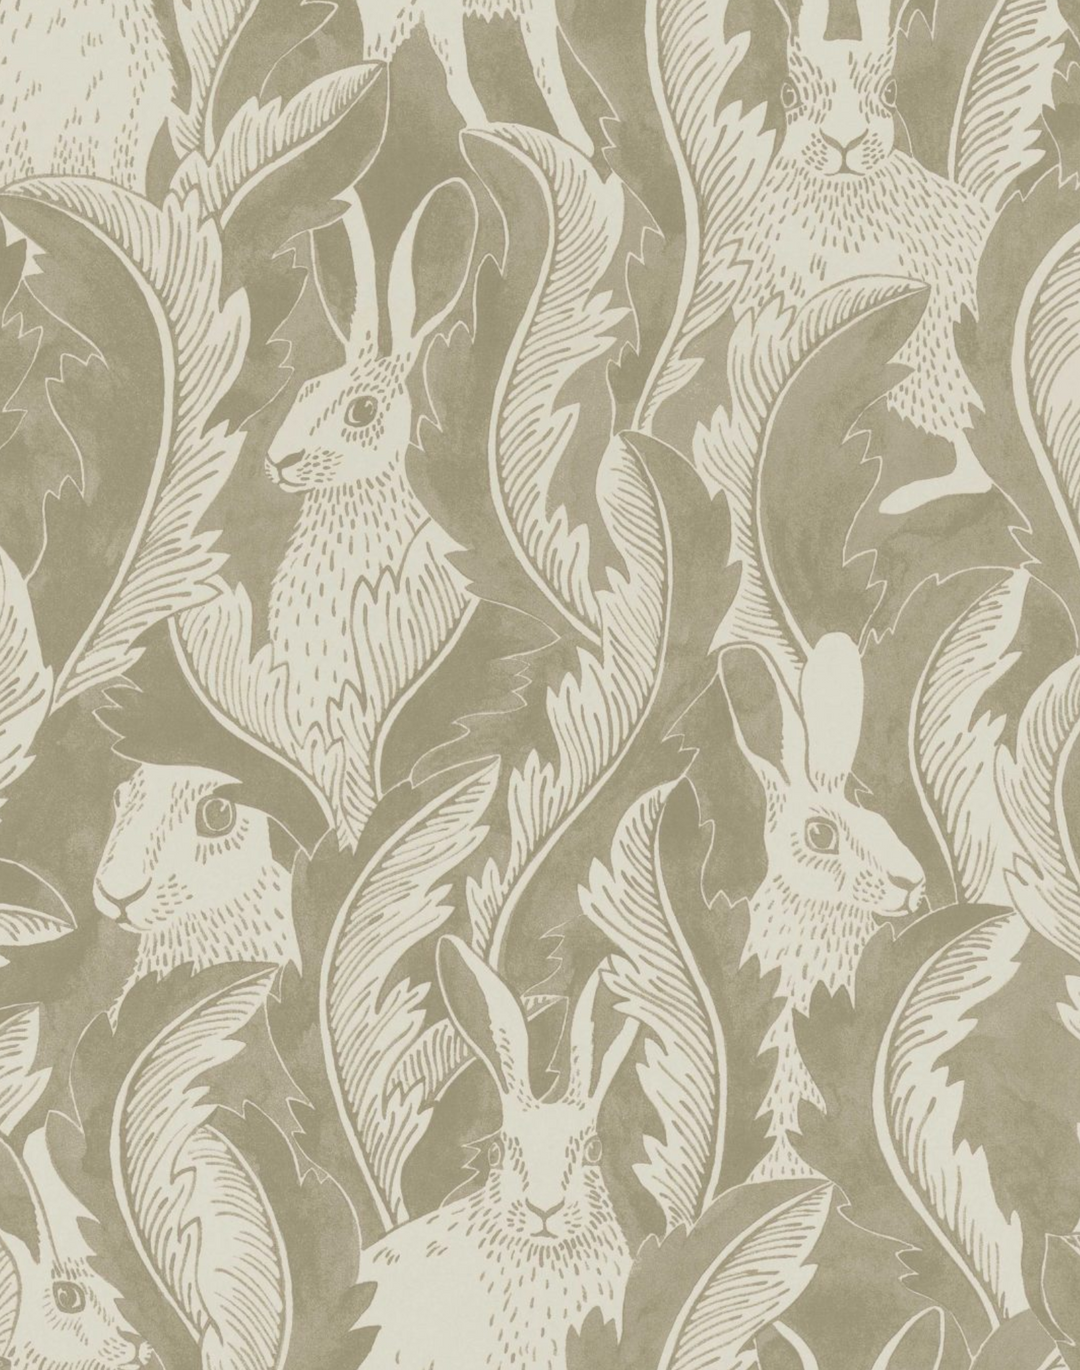 Hares in Hiding, Taupe